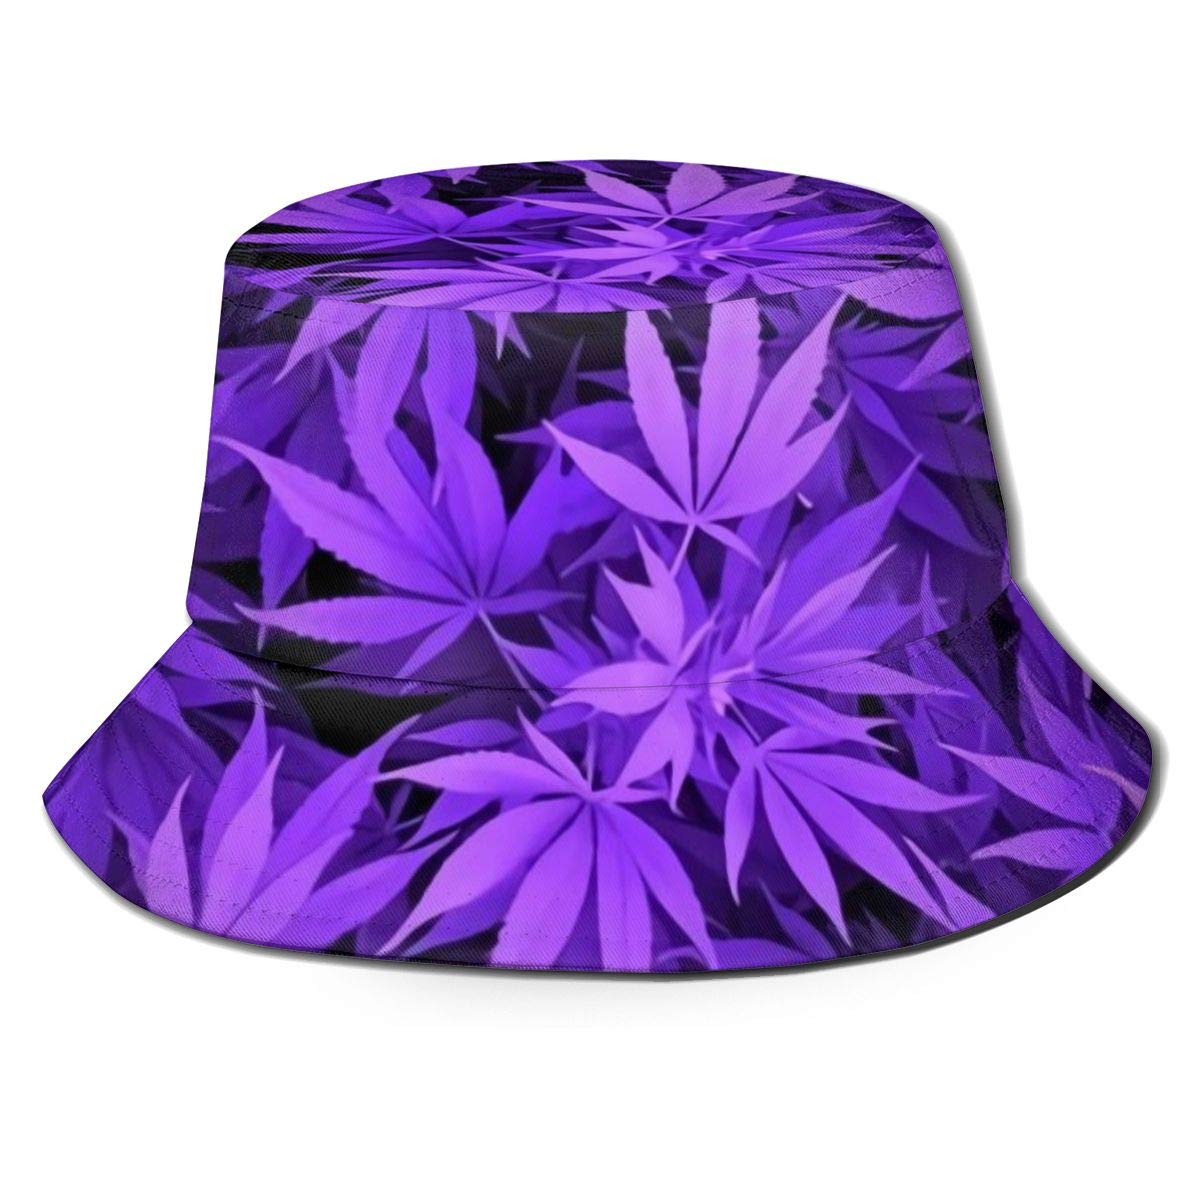 Zhung Ree Purple Cannabis Weed Leaves Bucket Hat for Men, Women